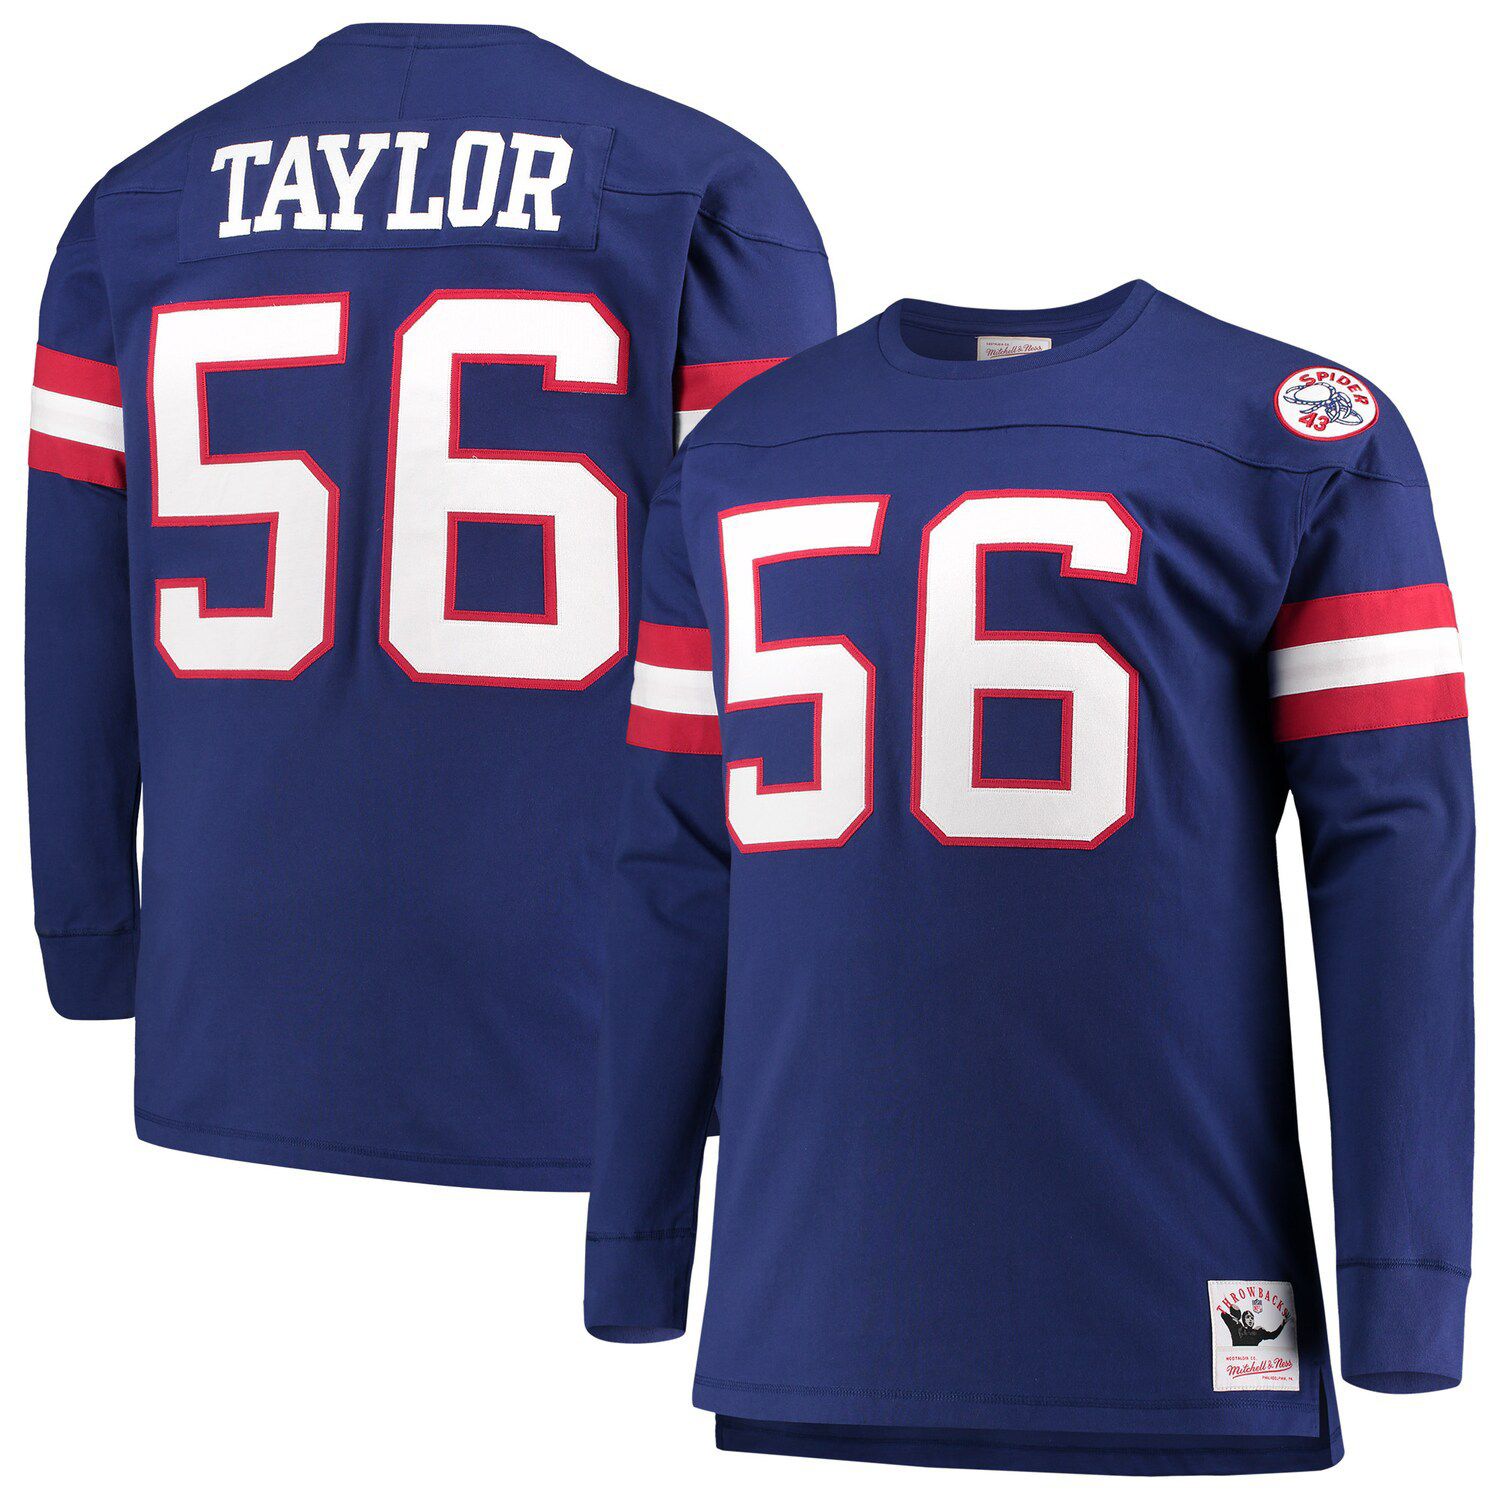 Image for Unbranded Men's Mitchell & Ness Lawrence Taylor Royal New York Giants Big & Tall Retired Player Name & Number Long Sleeve Top at Kohl's.